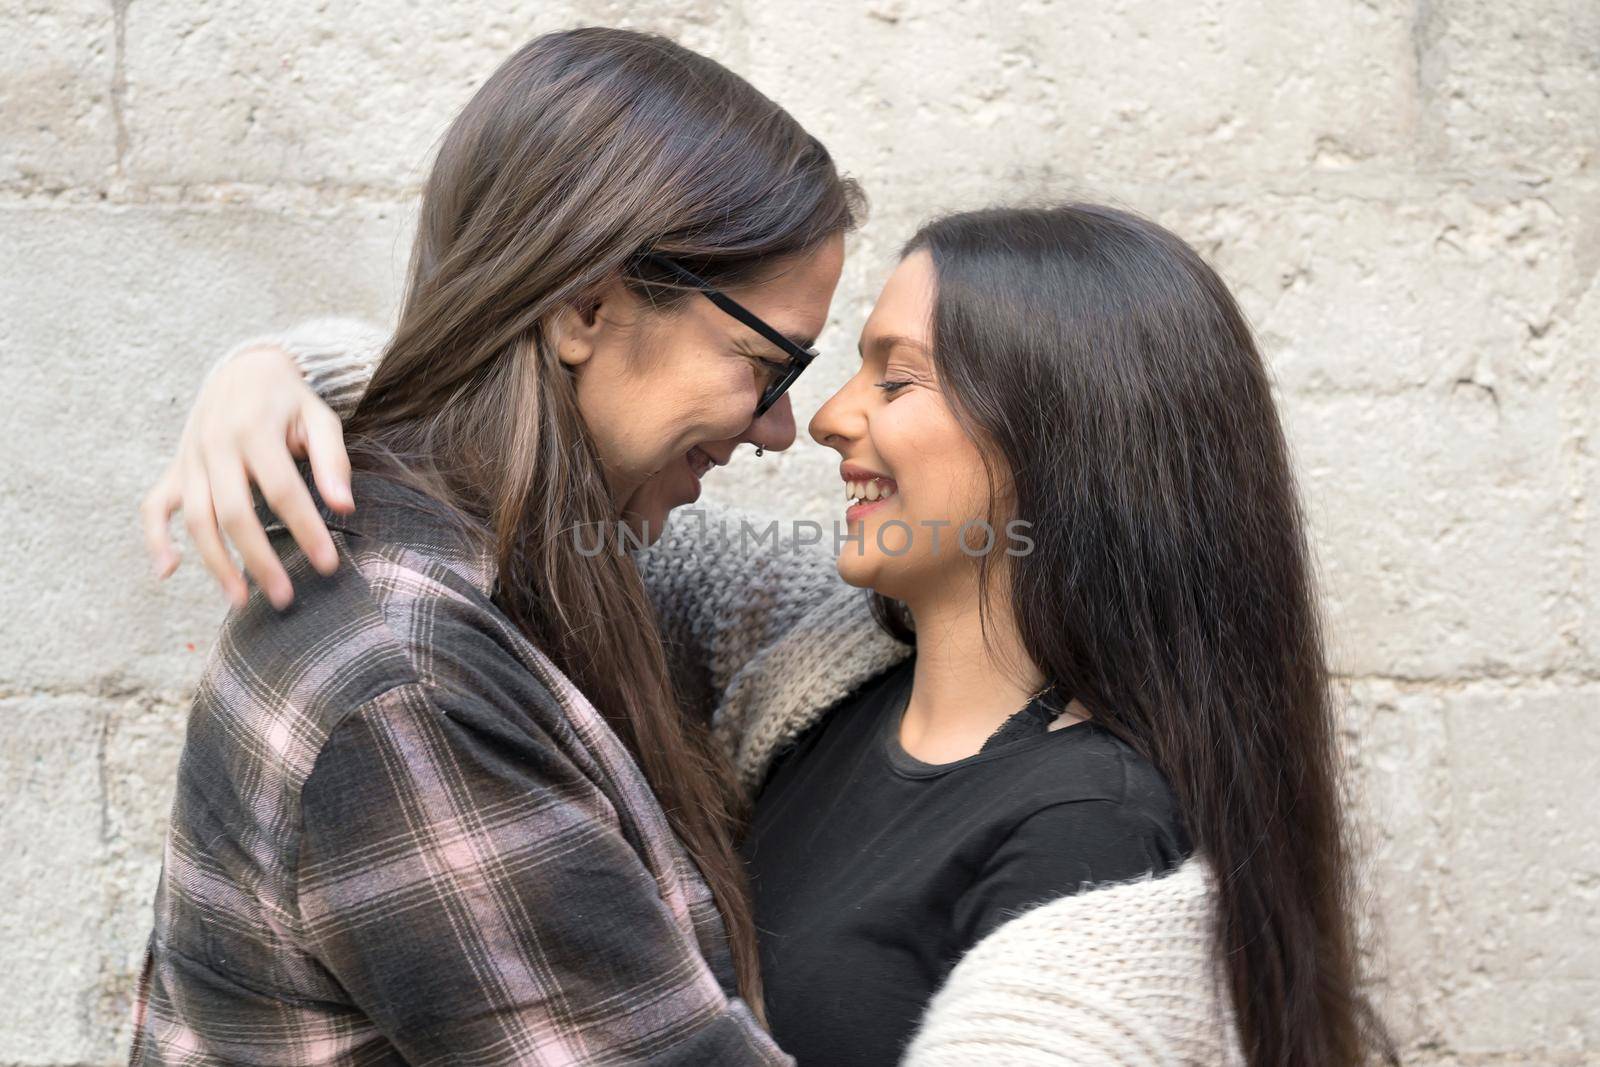 Portrait of an affectionate young lesbian couple hugging each other while standing together in front of a stone wall outside by HERRAEZ